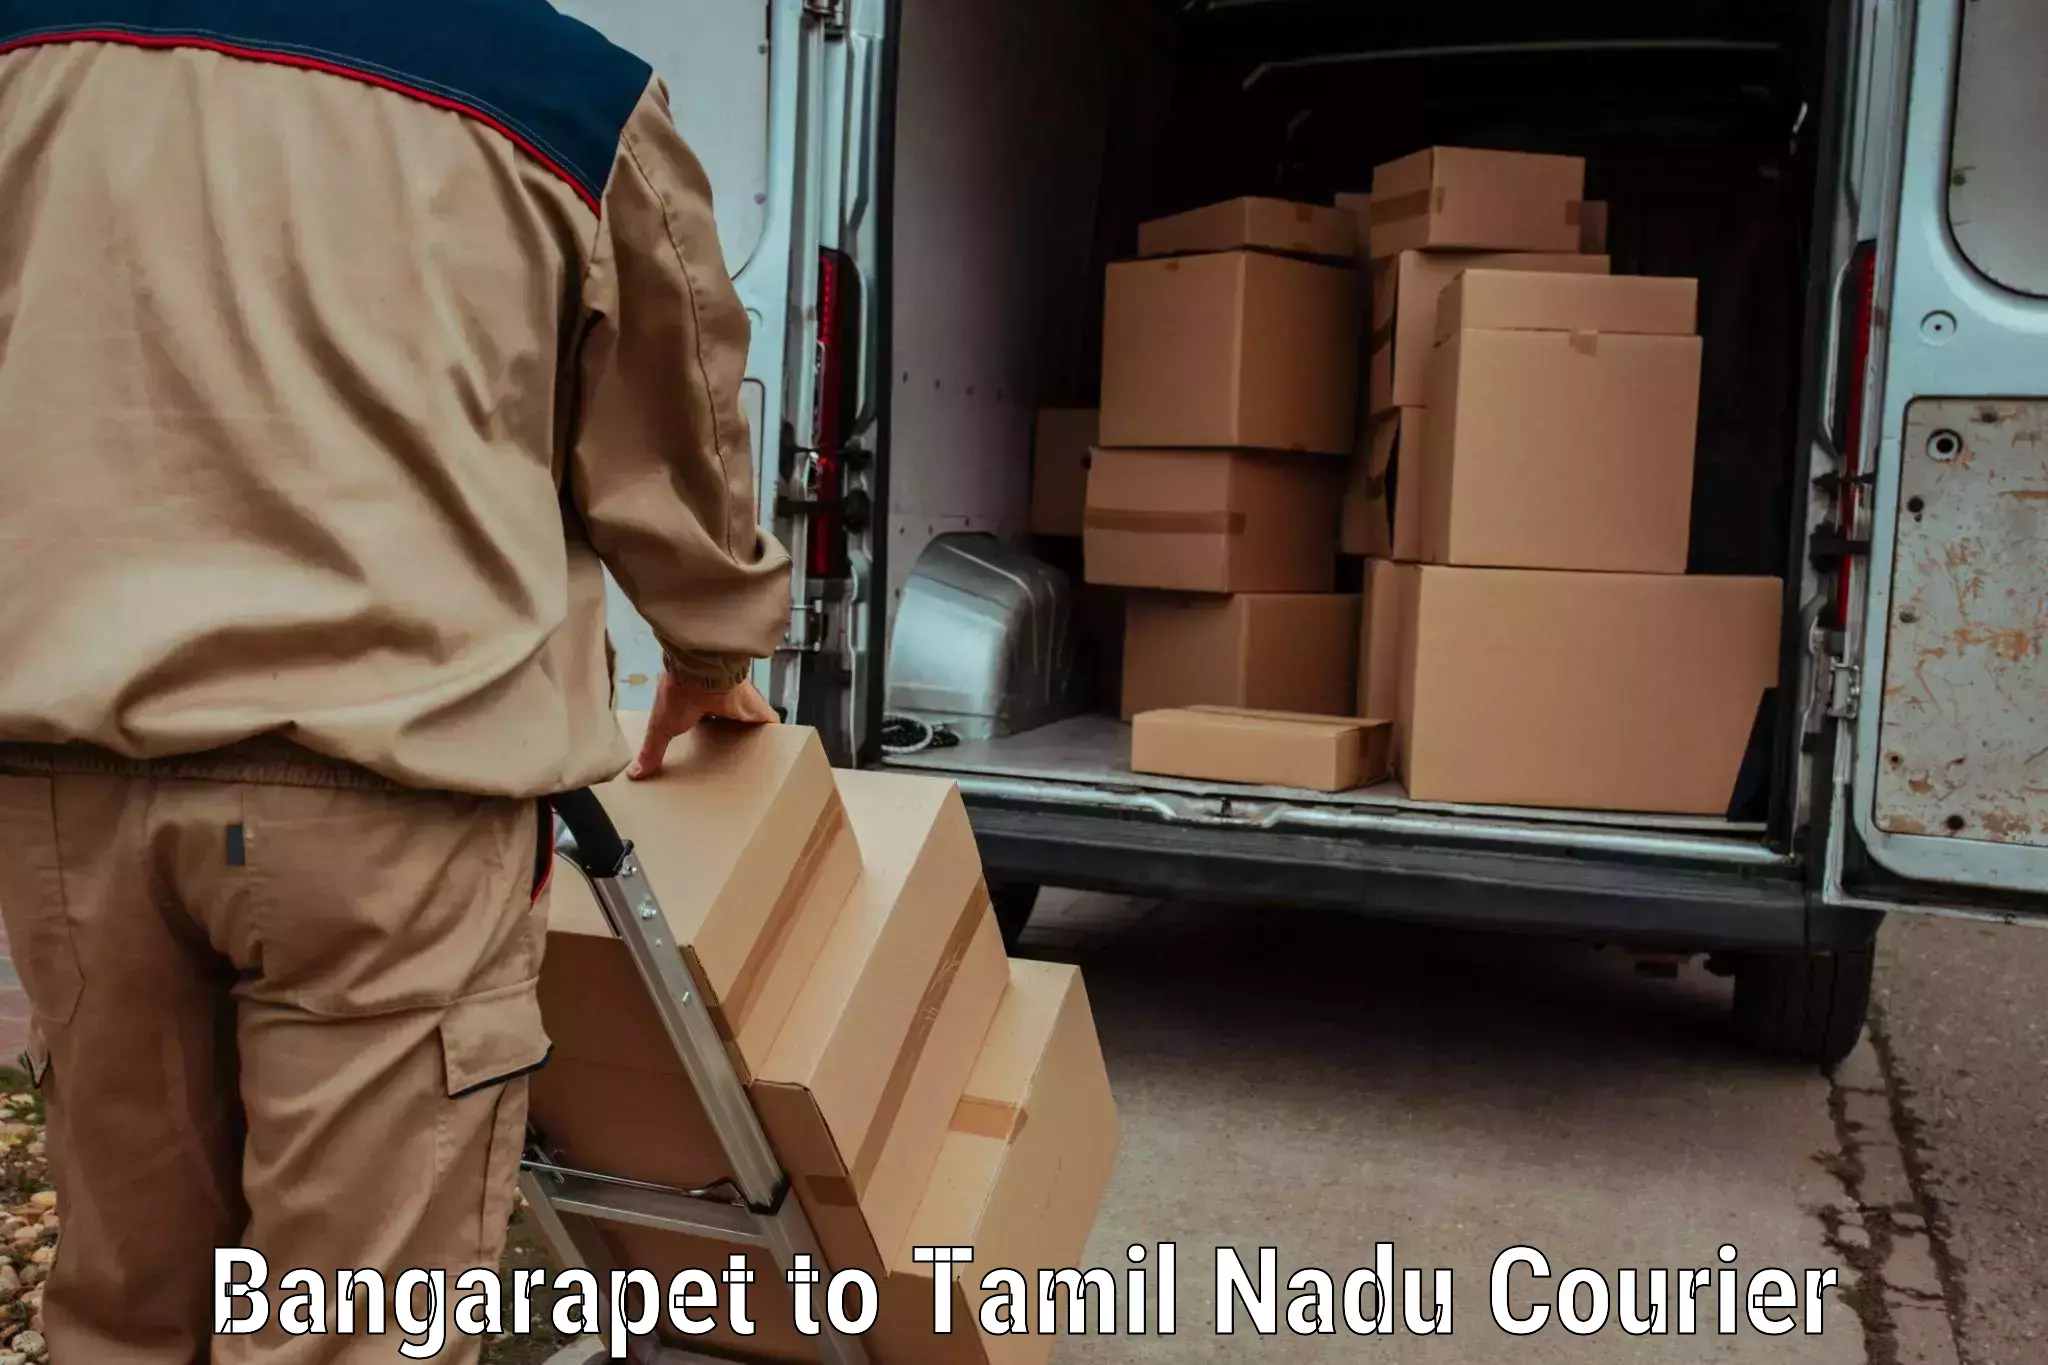 Personal parcel delivery in Bangarapet to Sirkazhi